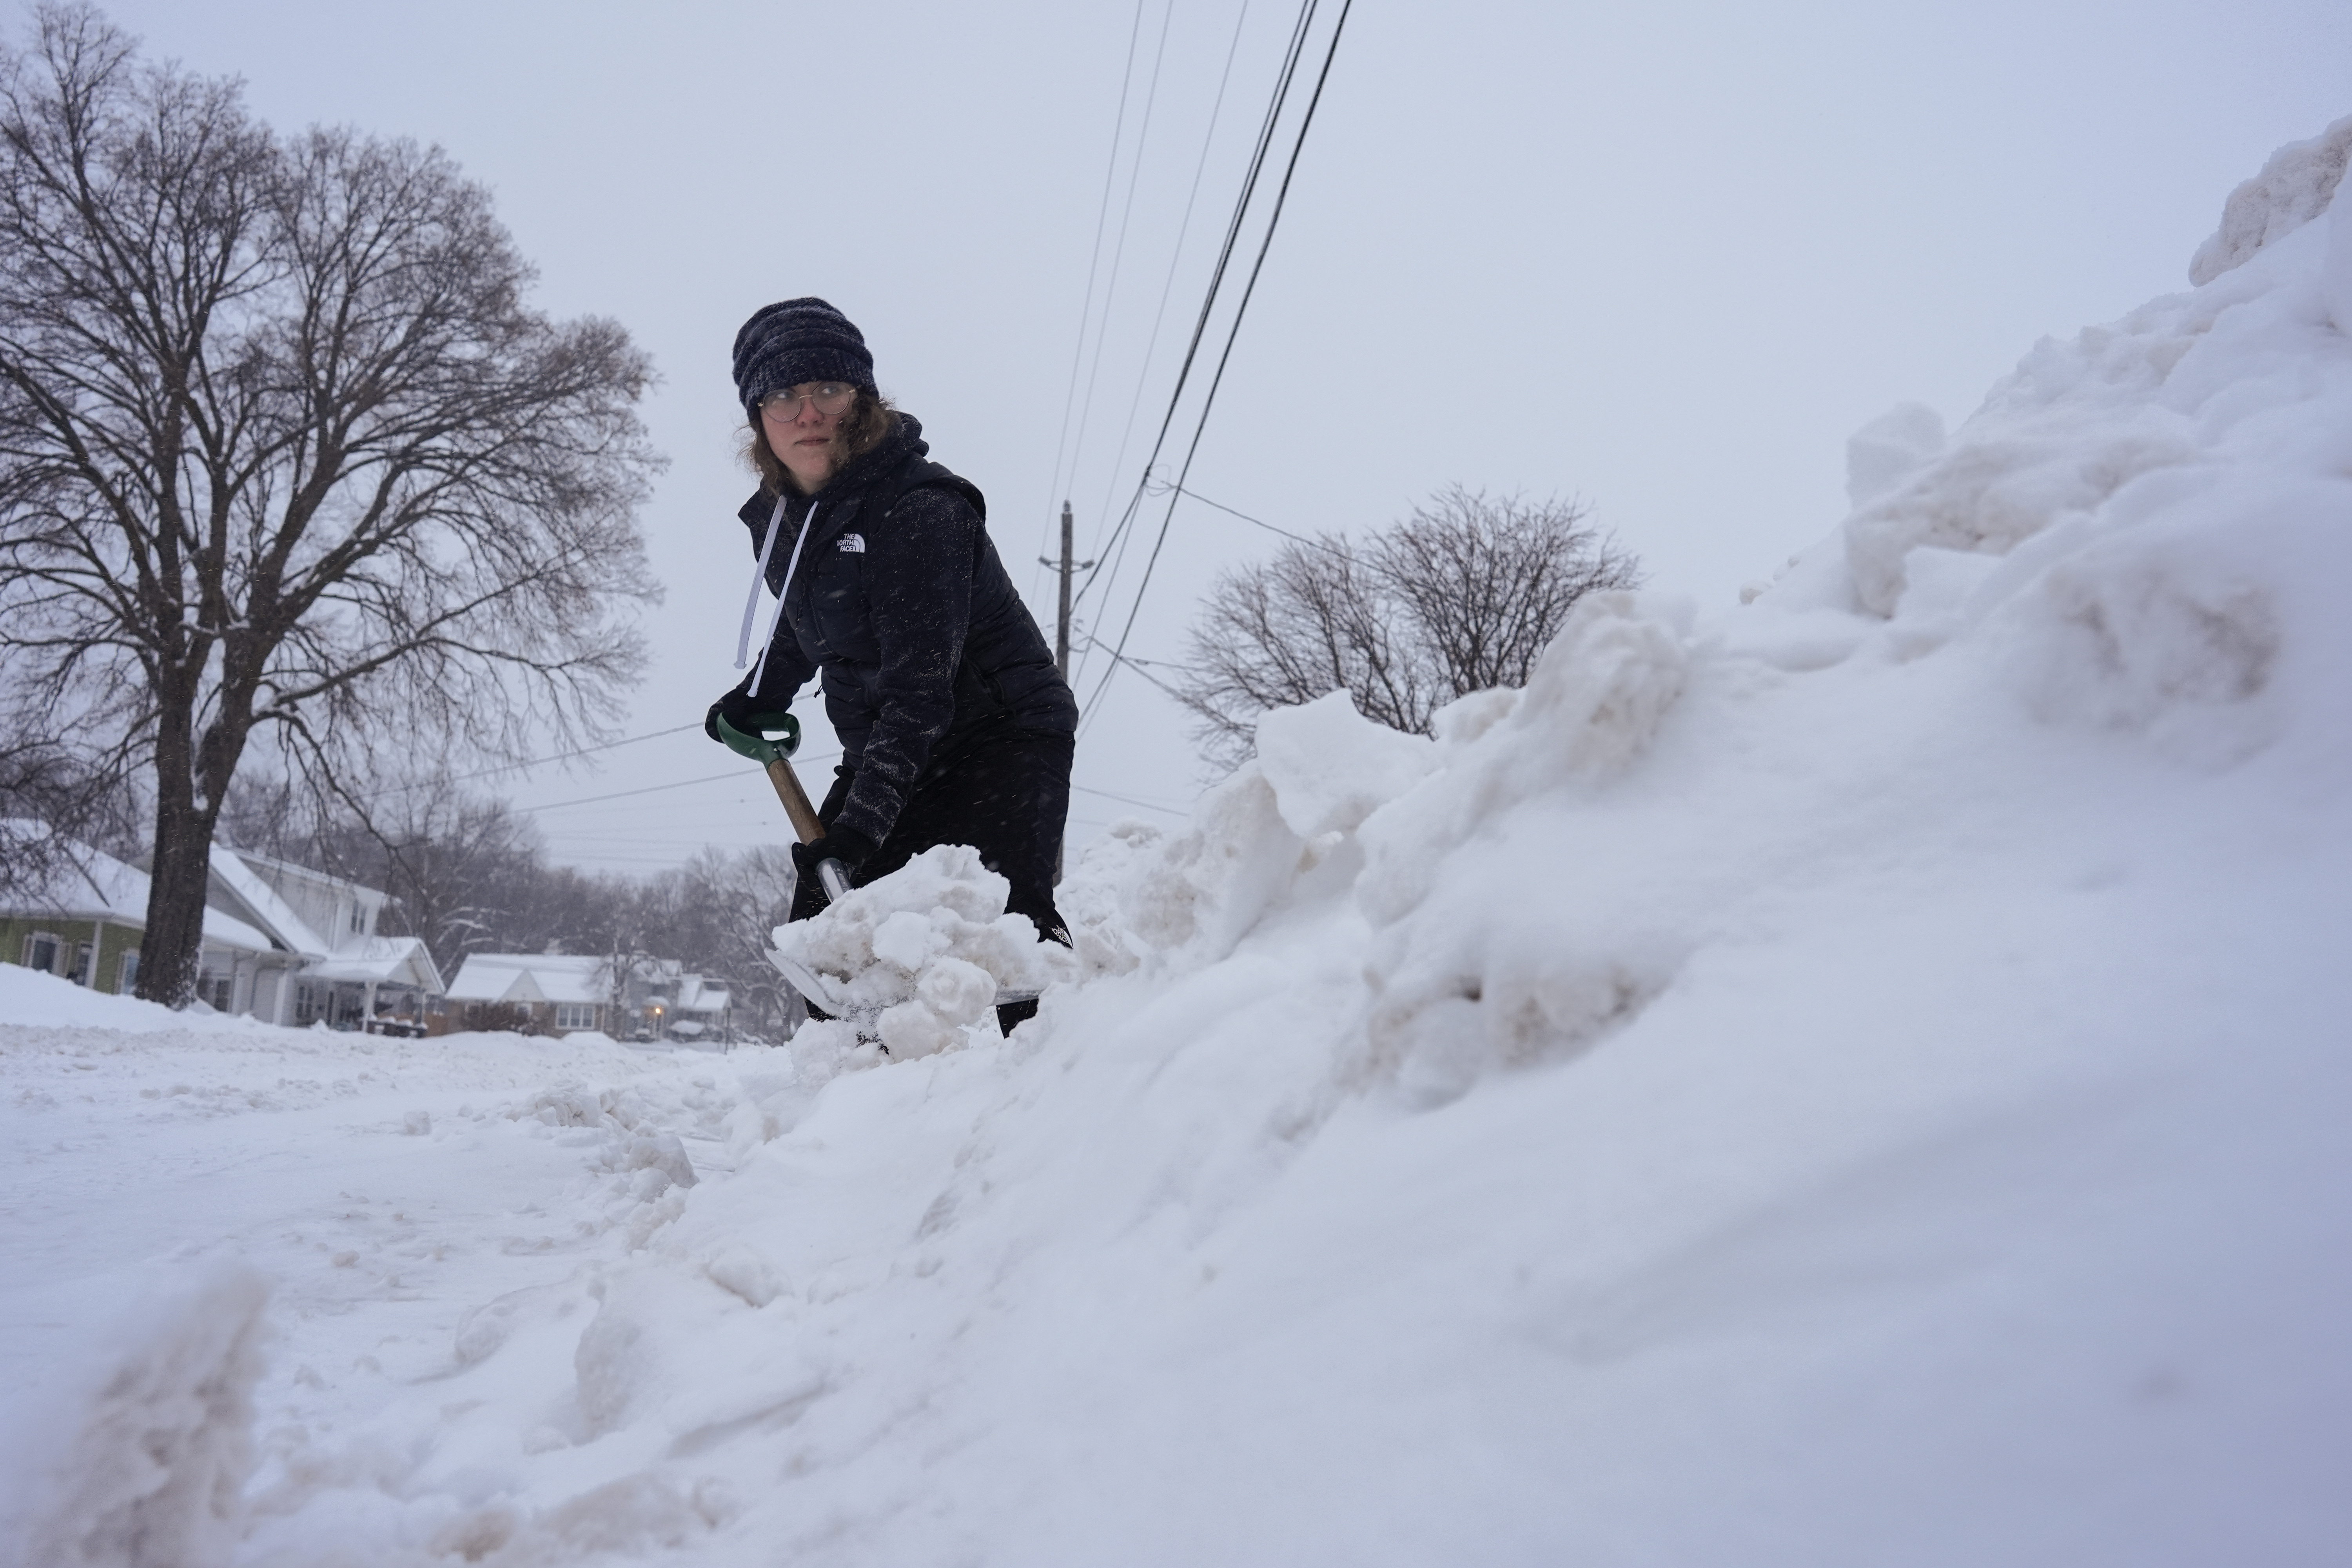 A weekend of ferocious winter weather could see low-temperature